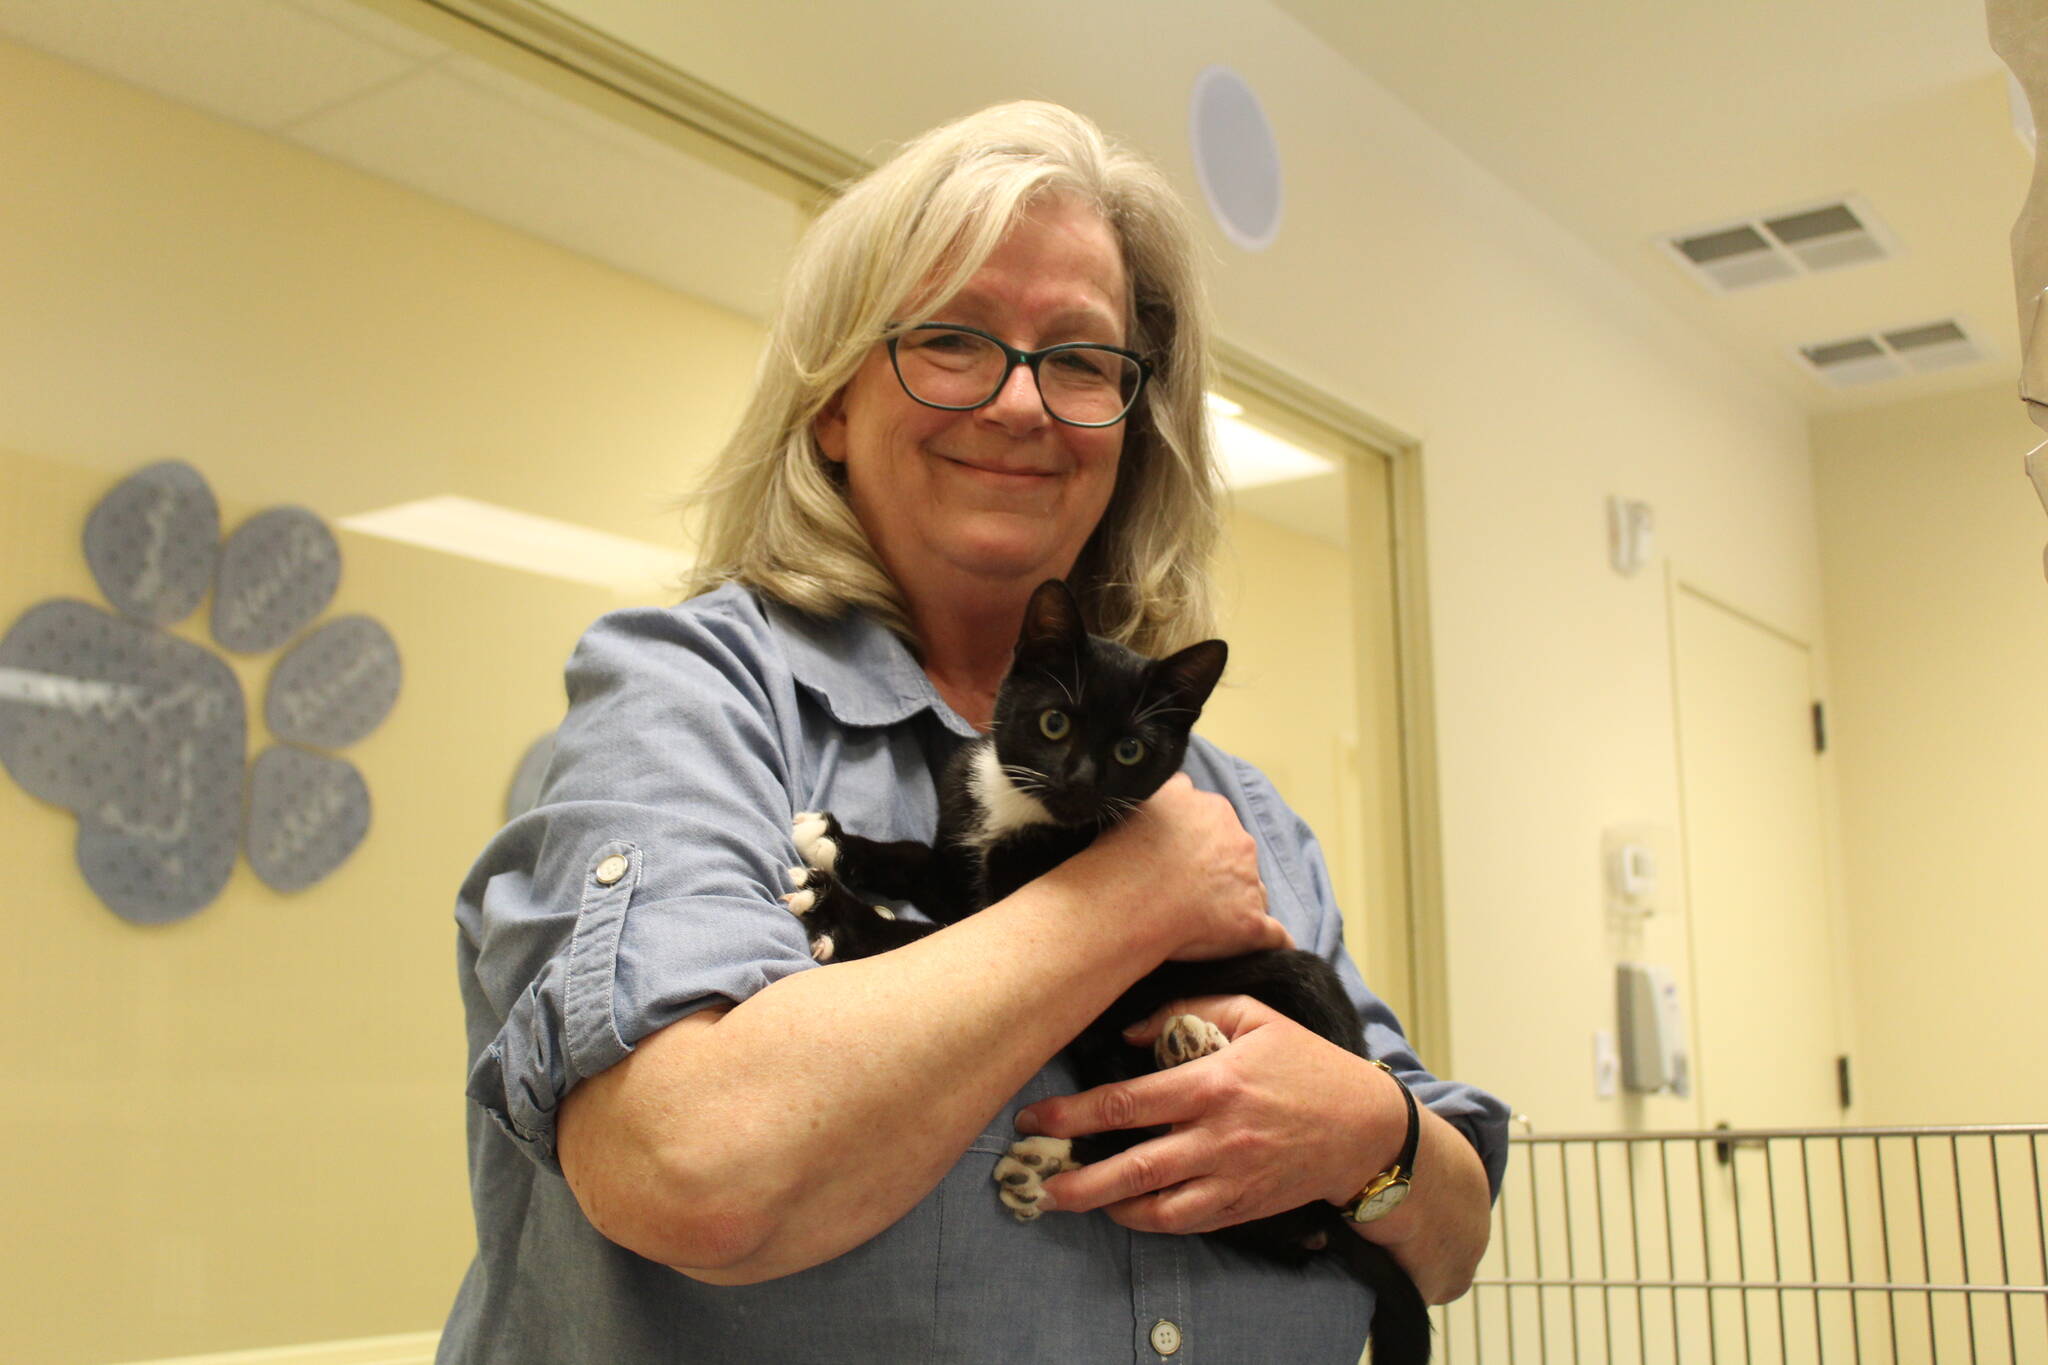 Photo by Karina Andrew/Whidbey News-Times
Shari Bibich snuggles a kitten living at the animal shelter, one of more than 20 cats currently up for adoption at WAIF.